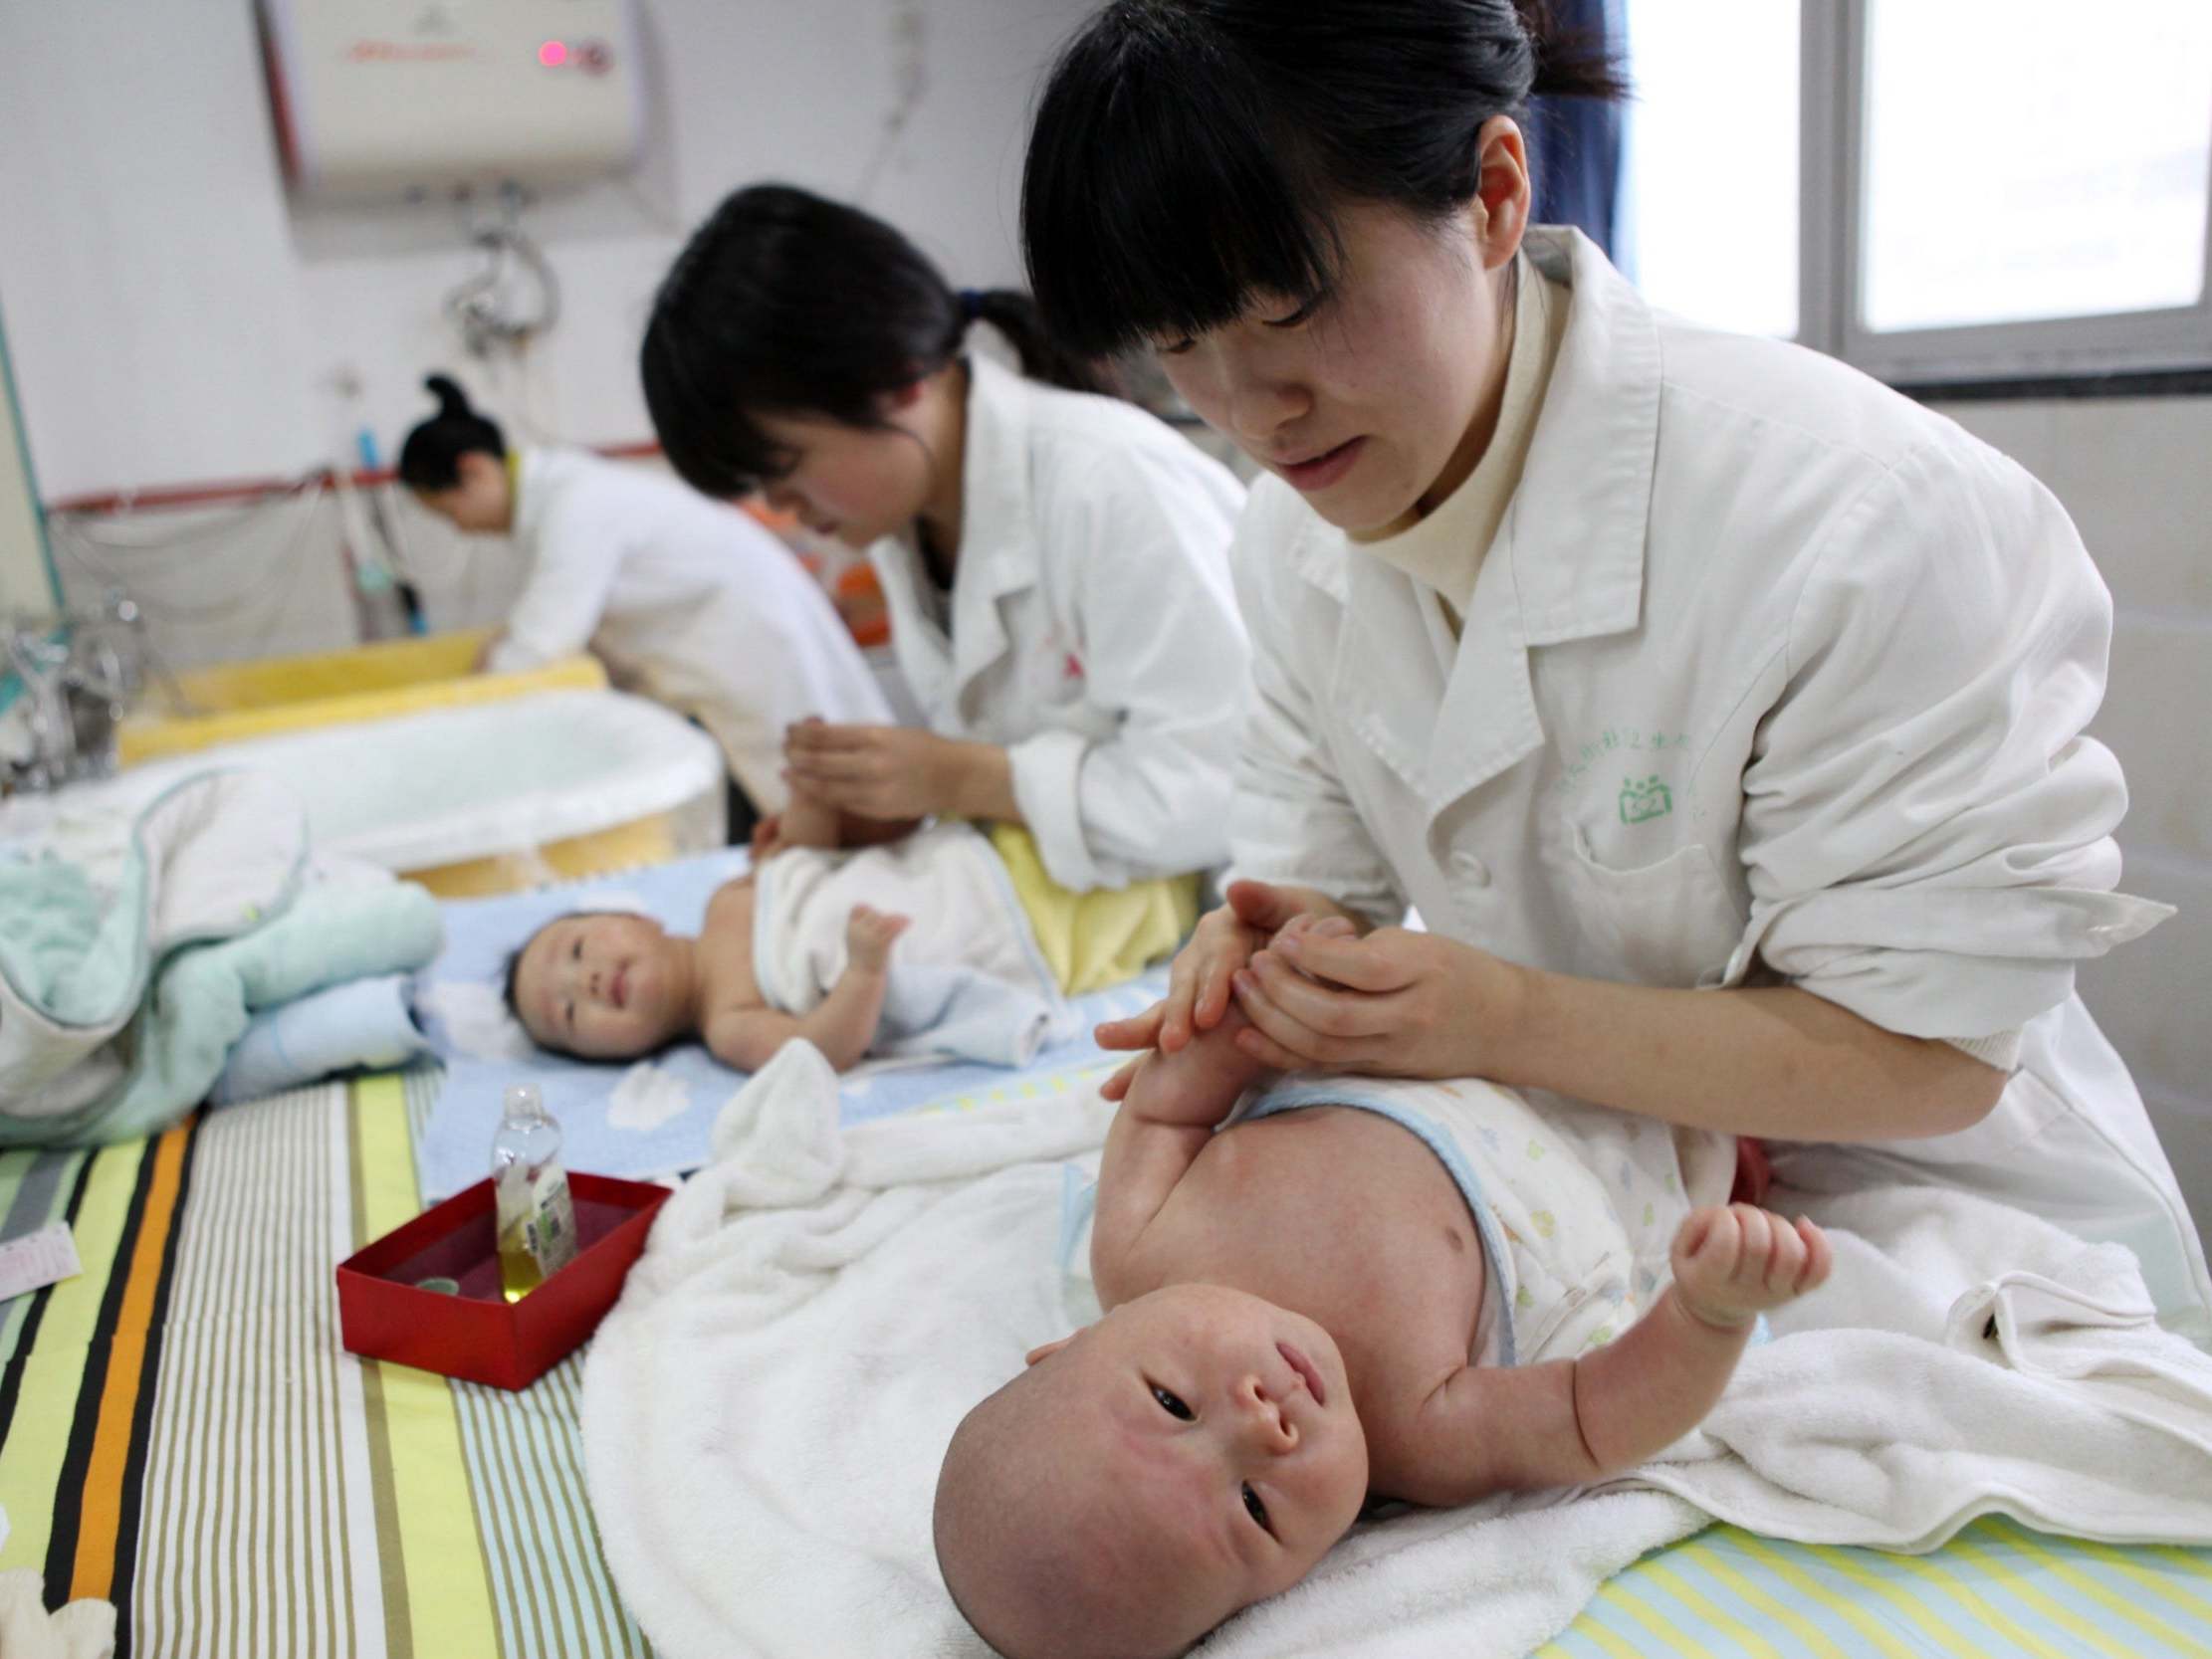 Nurses look after babies at an infant care centre in Yongquan, southwest China